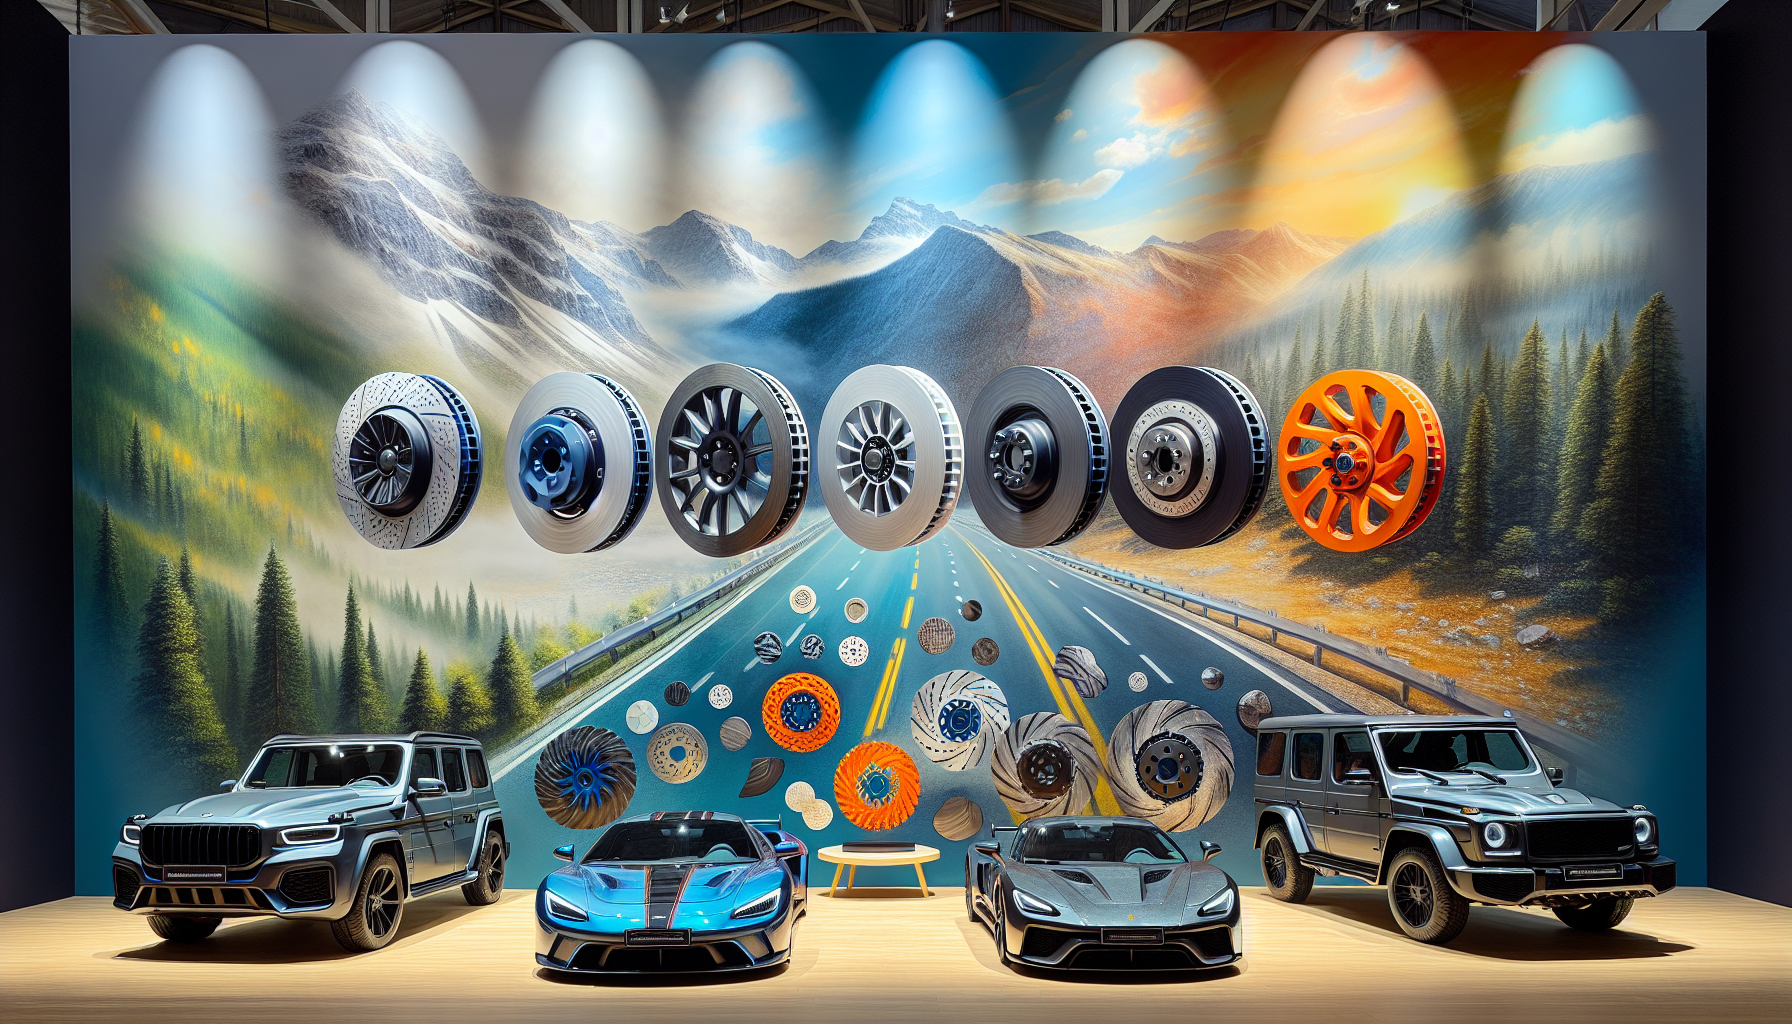 Artistic depiction of various rotor materials for vehicles